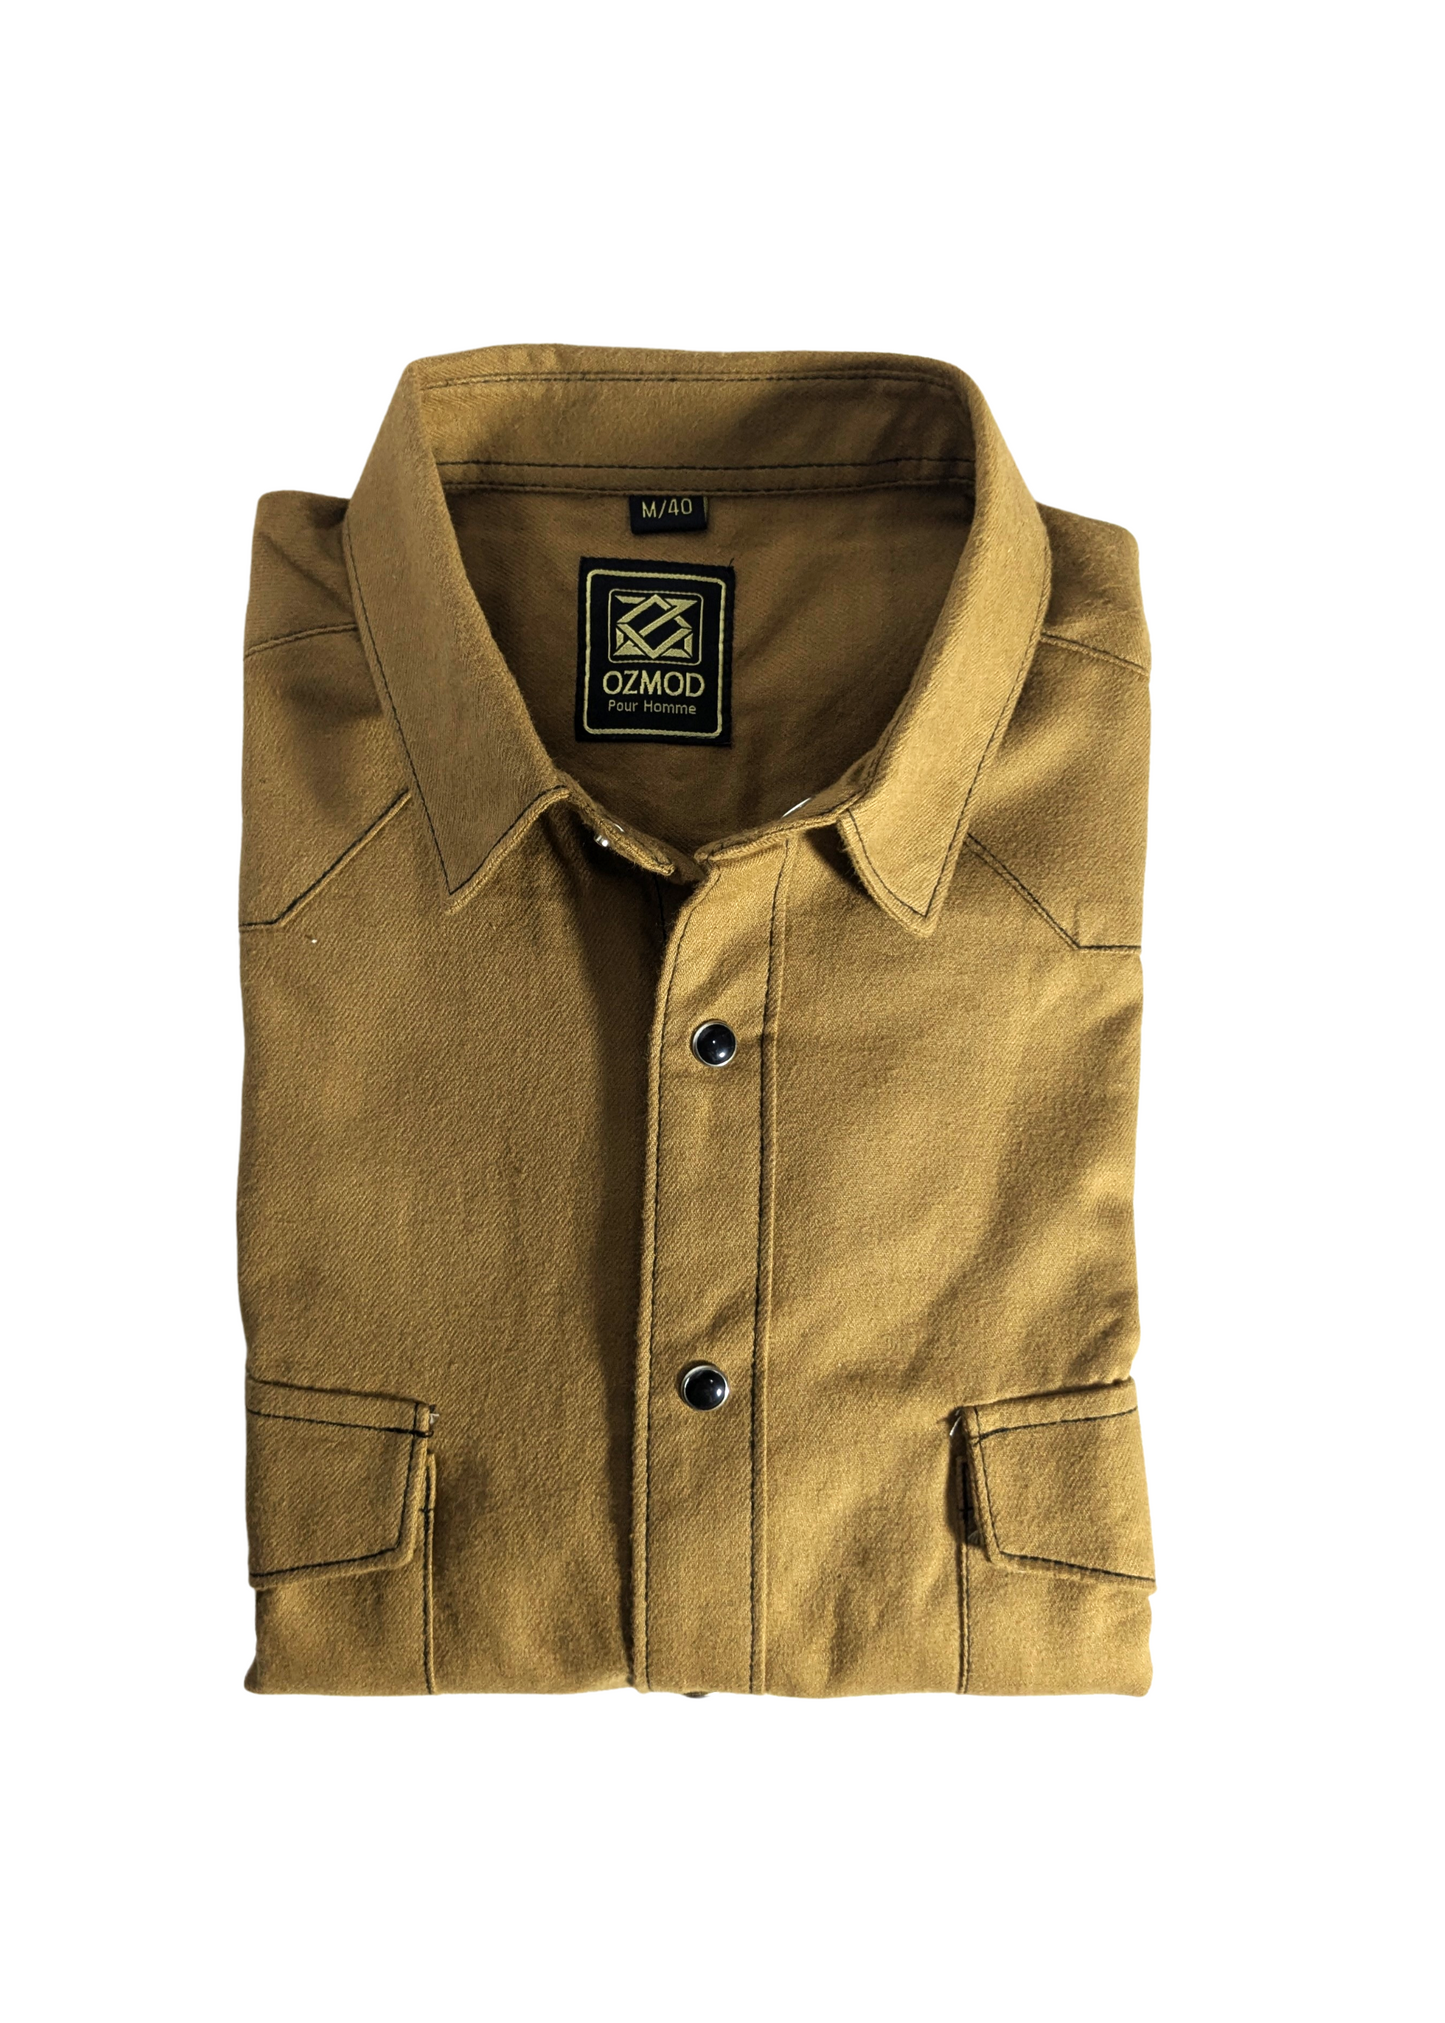 Men's Tan Colour Western Shirt in Twill Cotton with Western Yoke